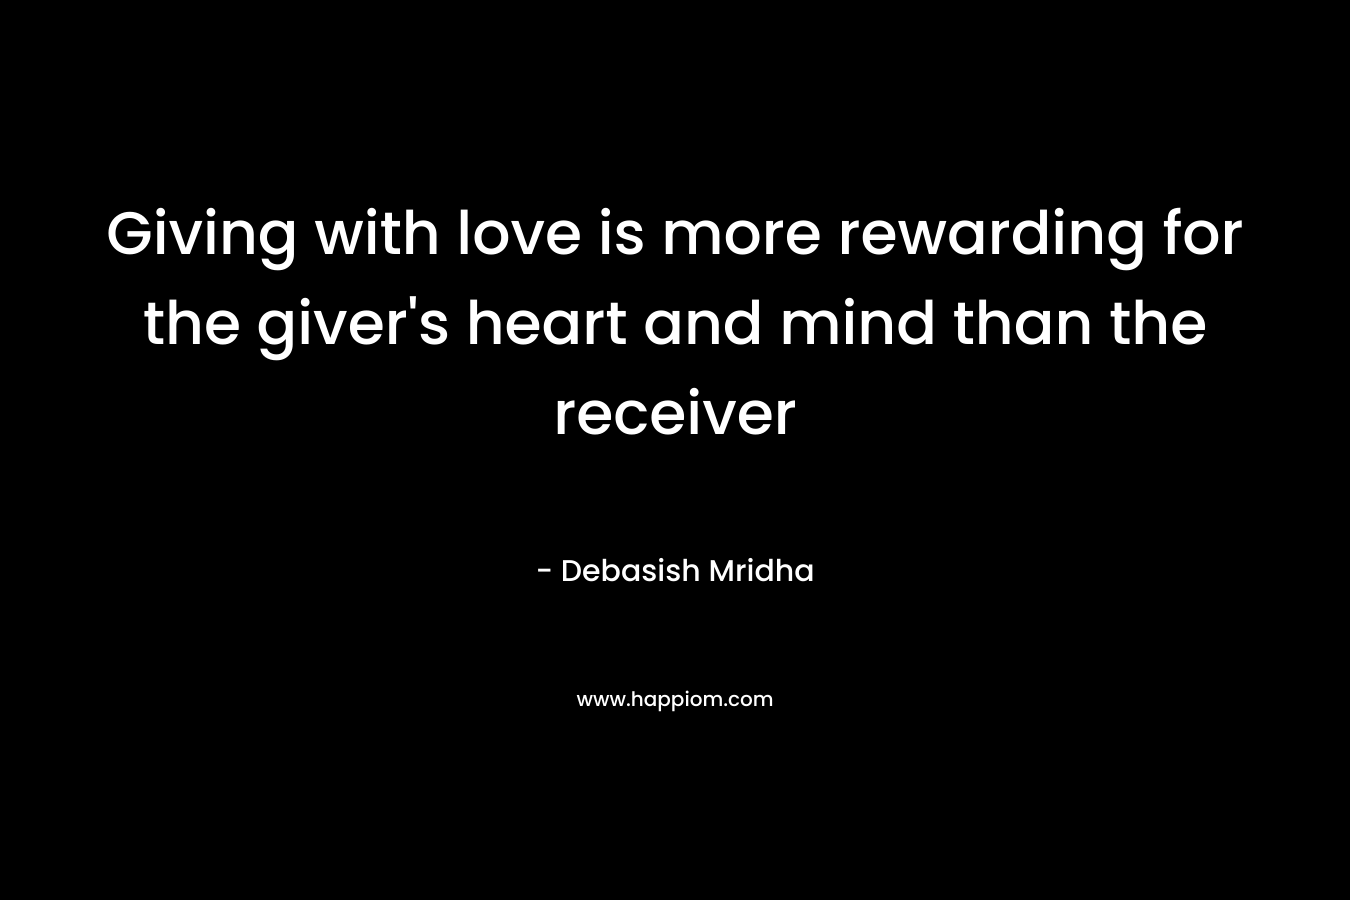 Giving with love is more rewarding for the giver's heart and mind than the receiver